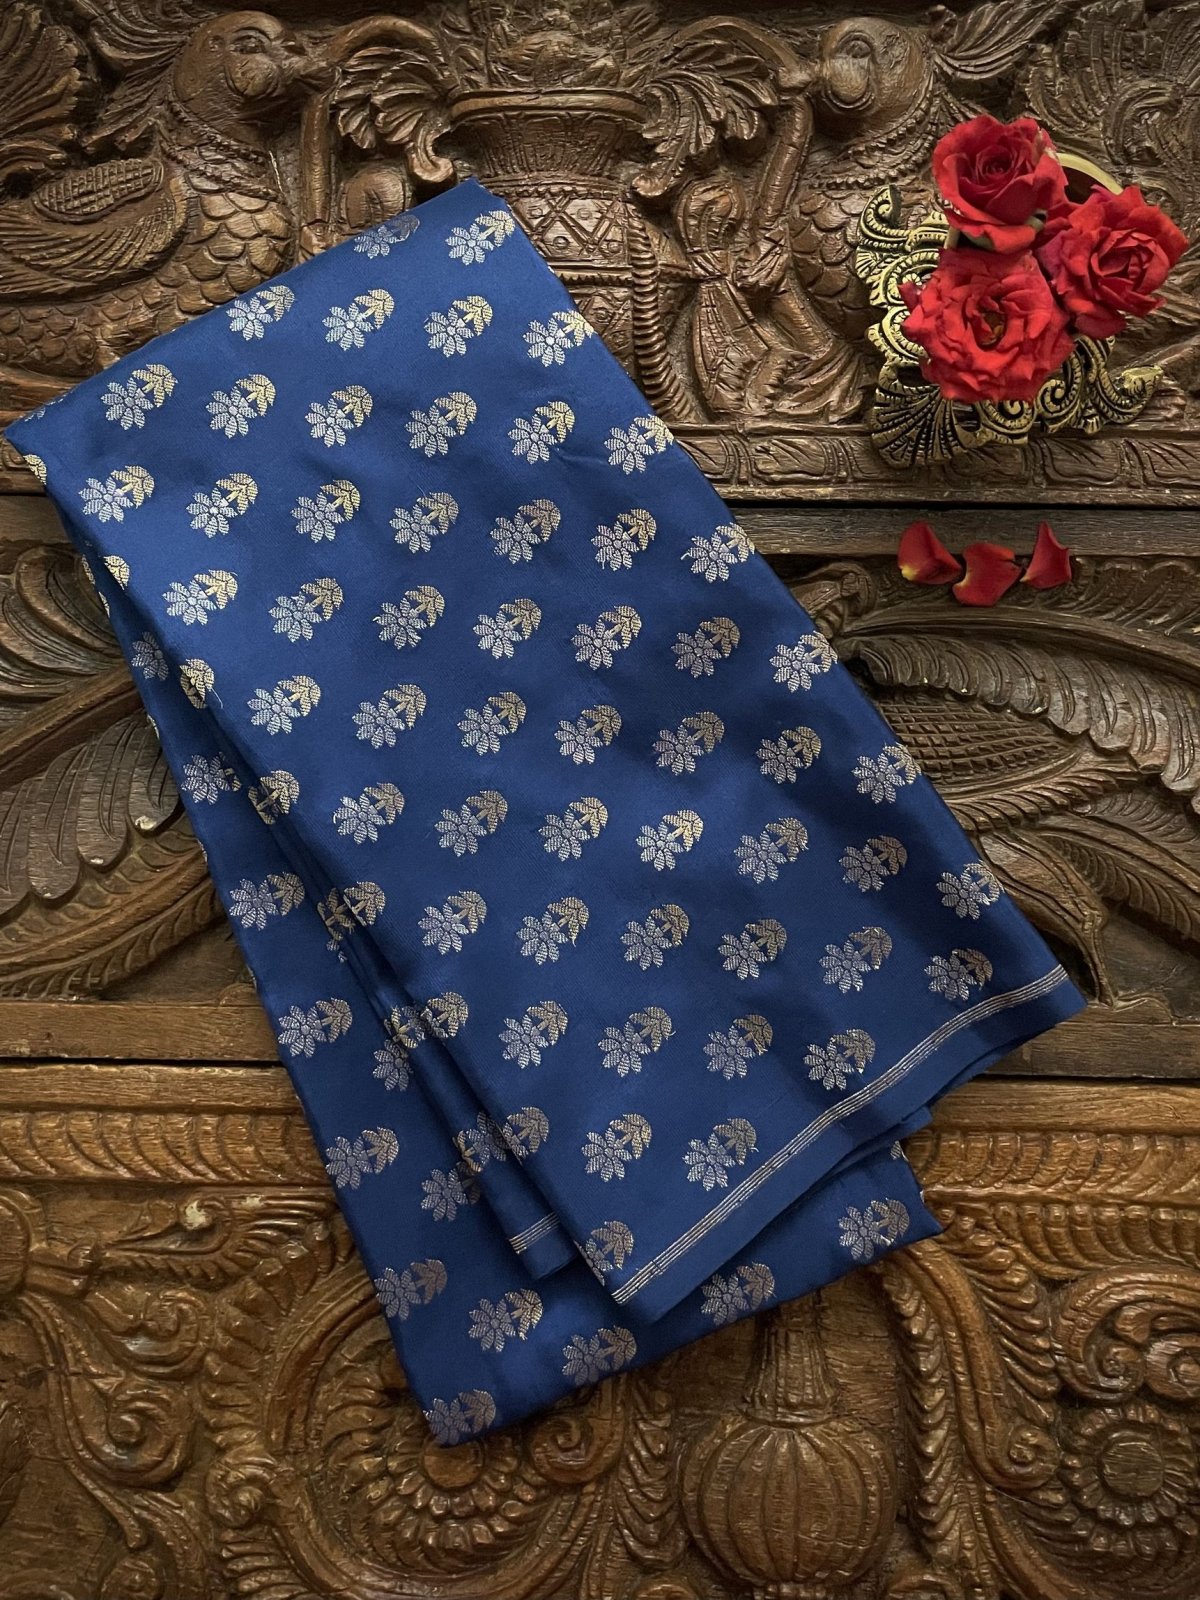 Blue Banaras Silk Blouse With Gold and Silver Floral Buttis